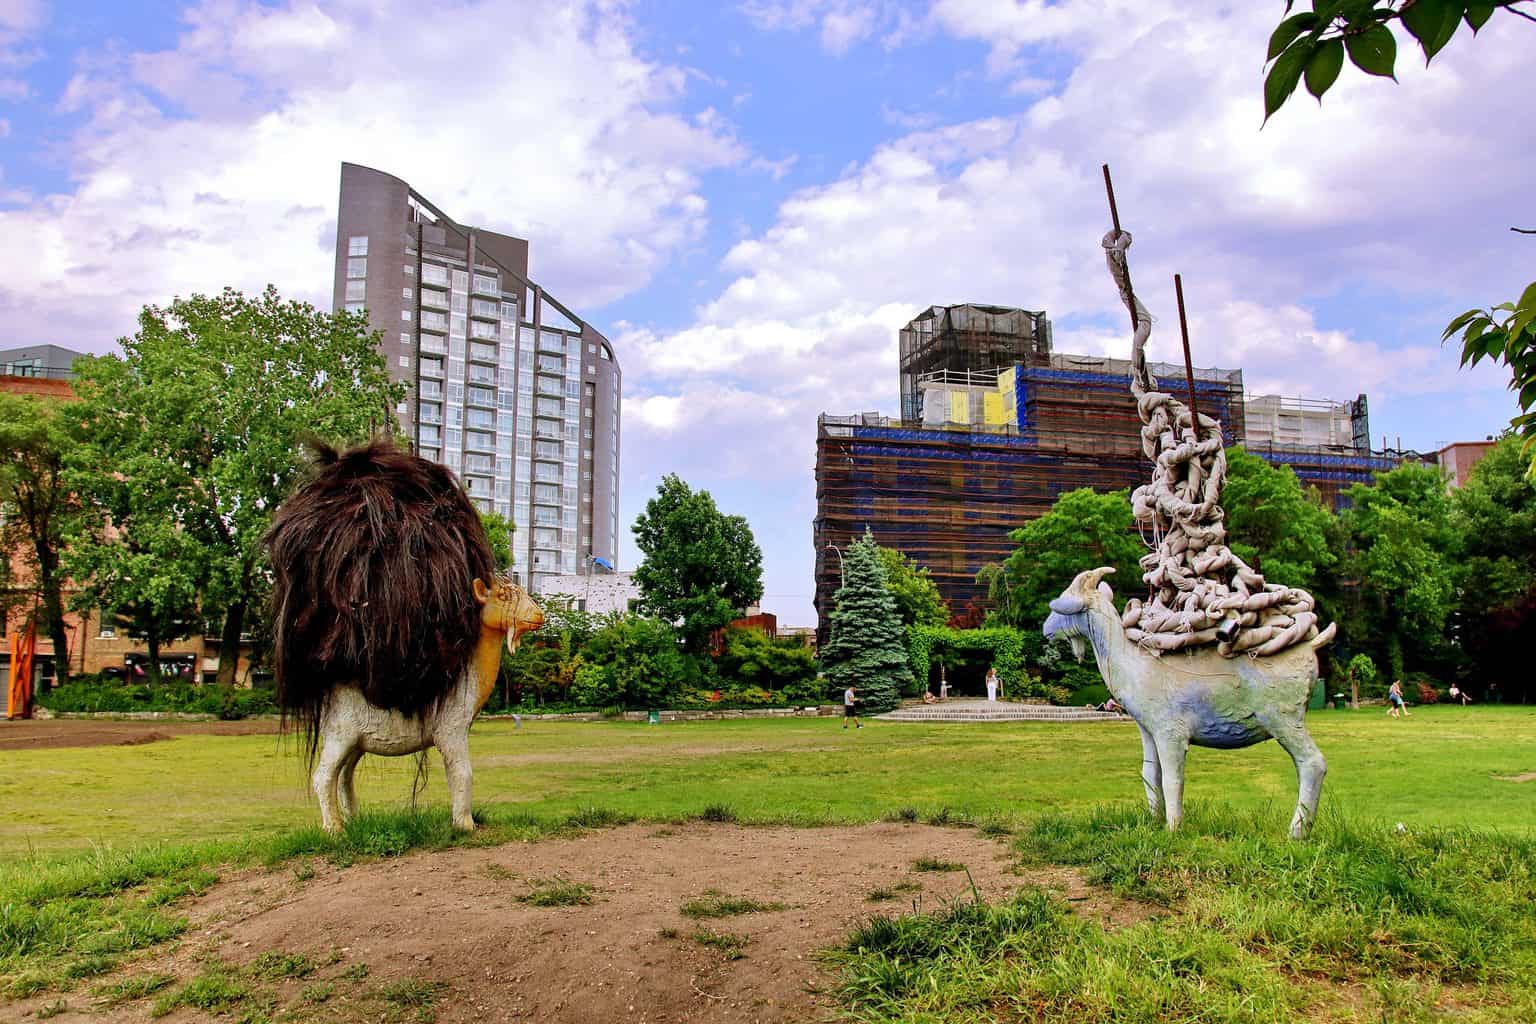 Some of the incredibly quirky art installations you'll find at Socrates Sculpture Park. 